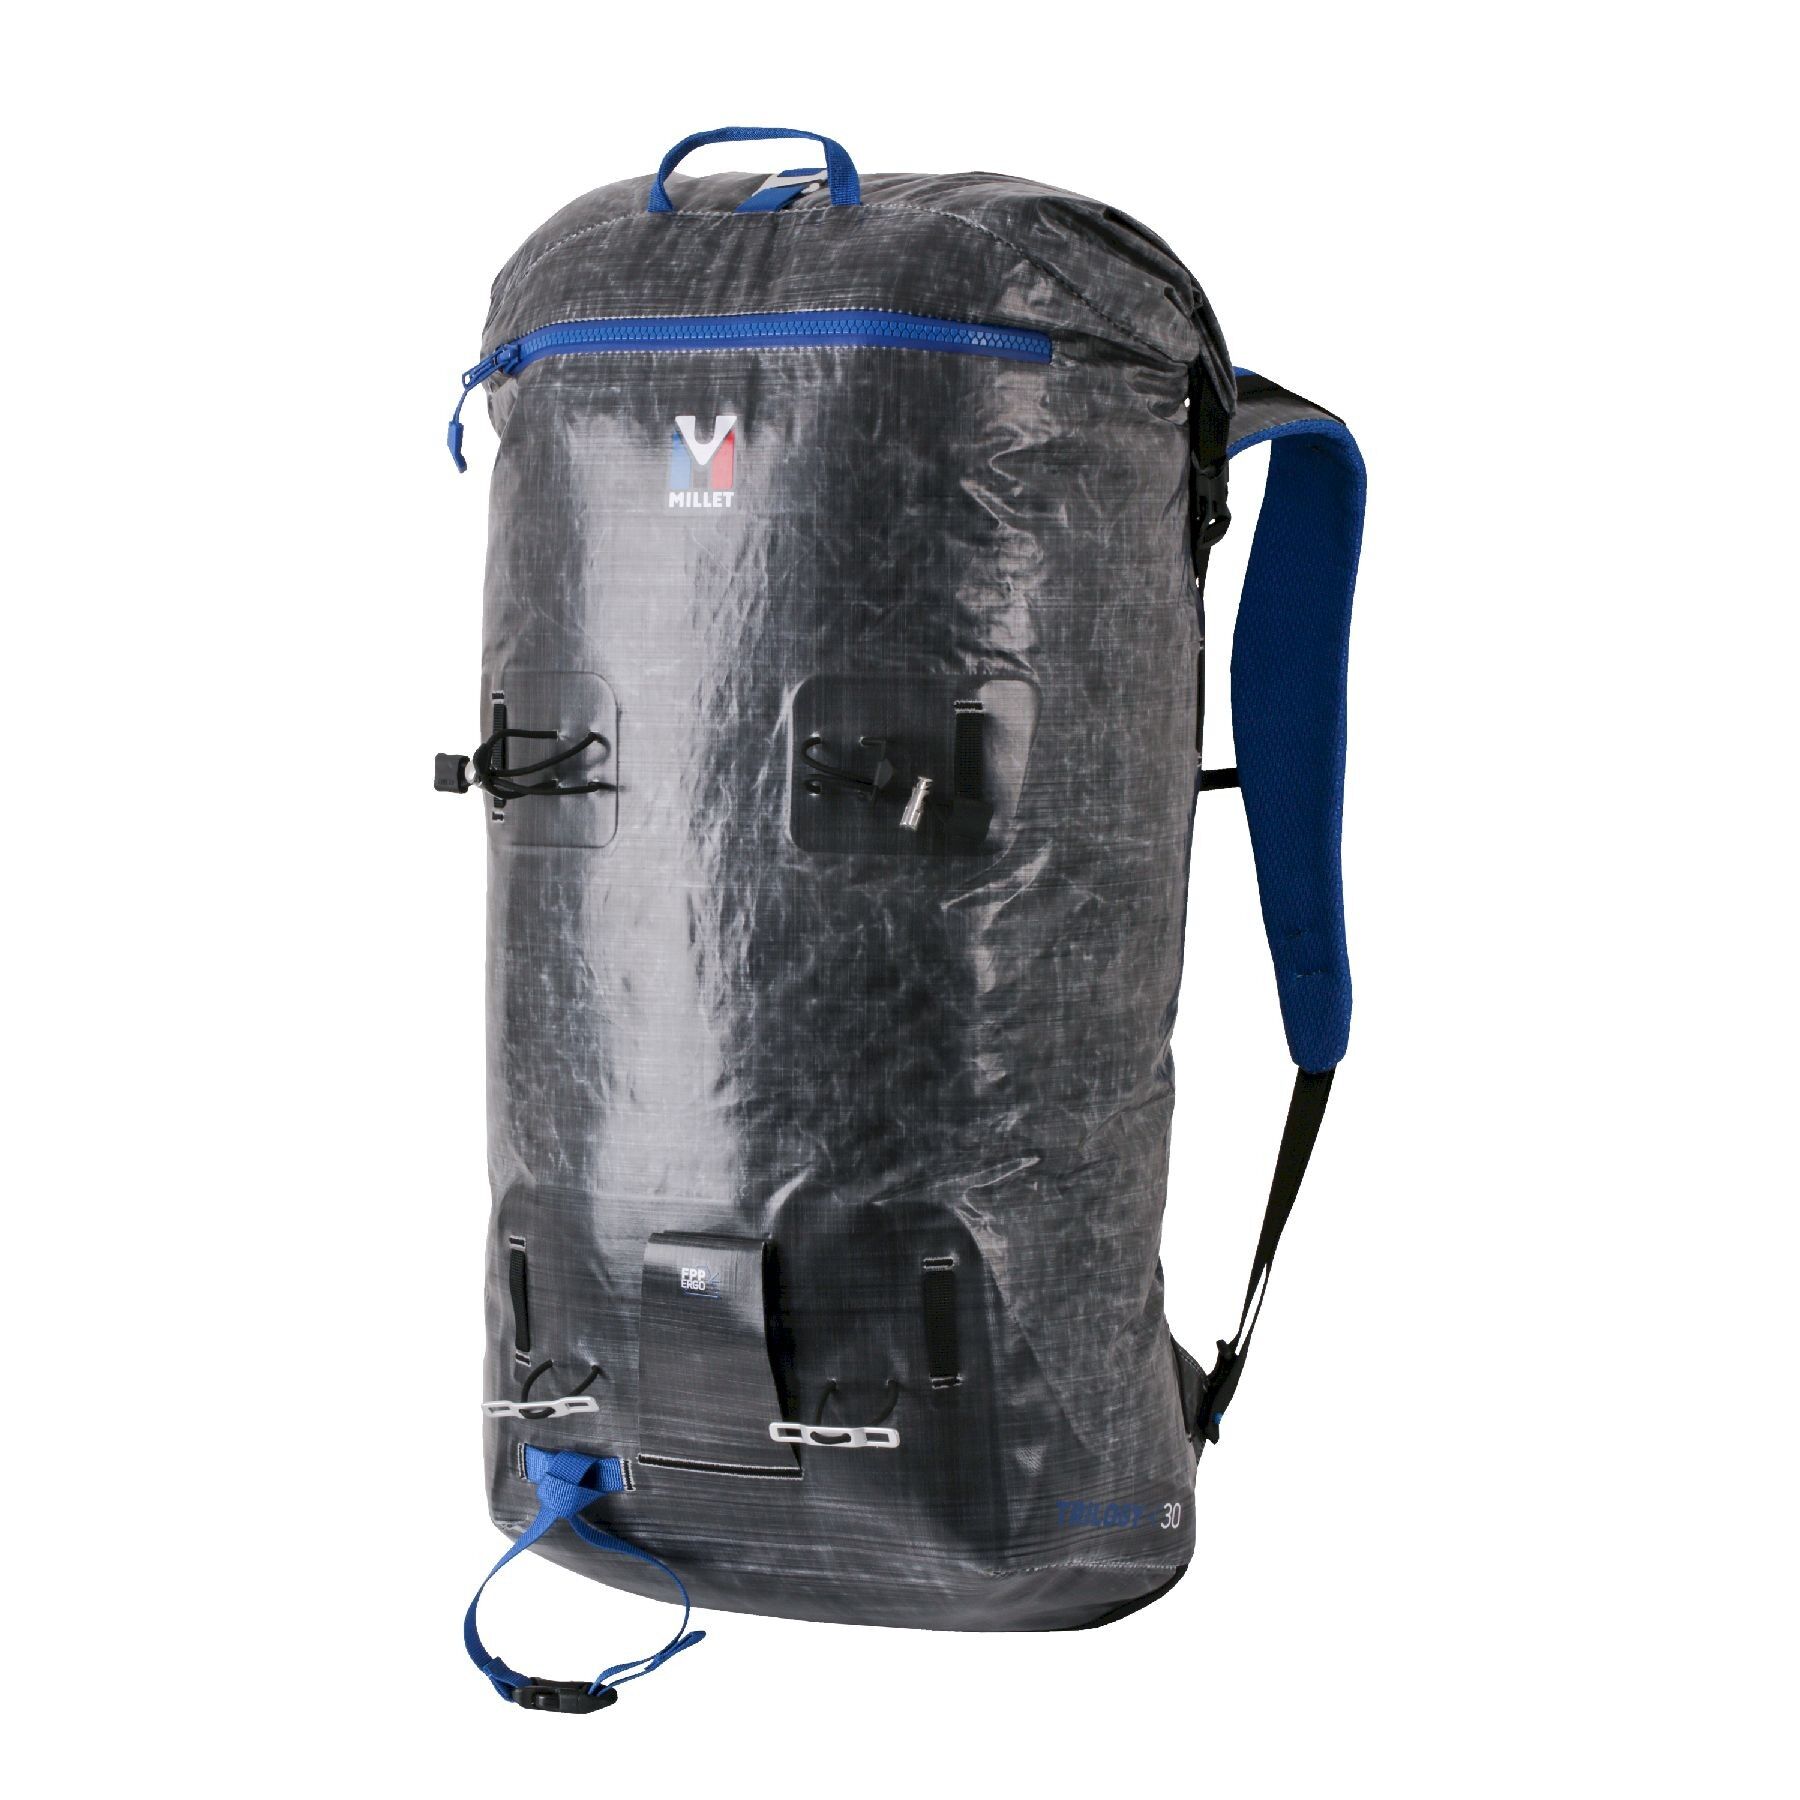 Millet Trilogy 30 - Mountaineering backpack